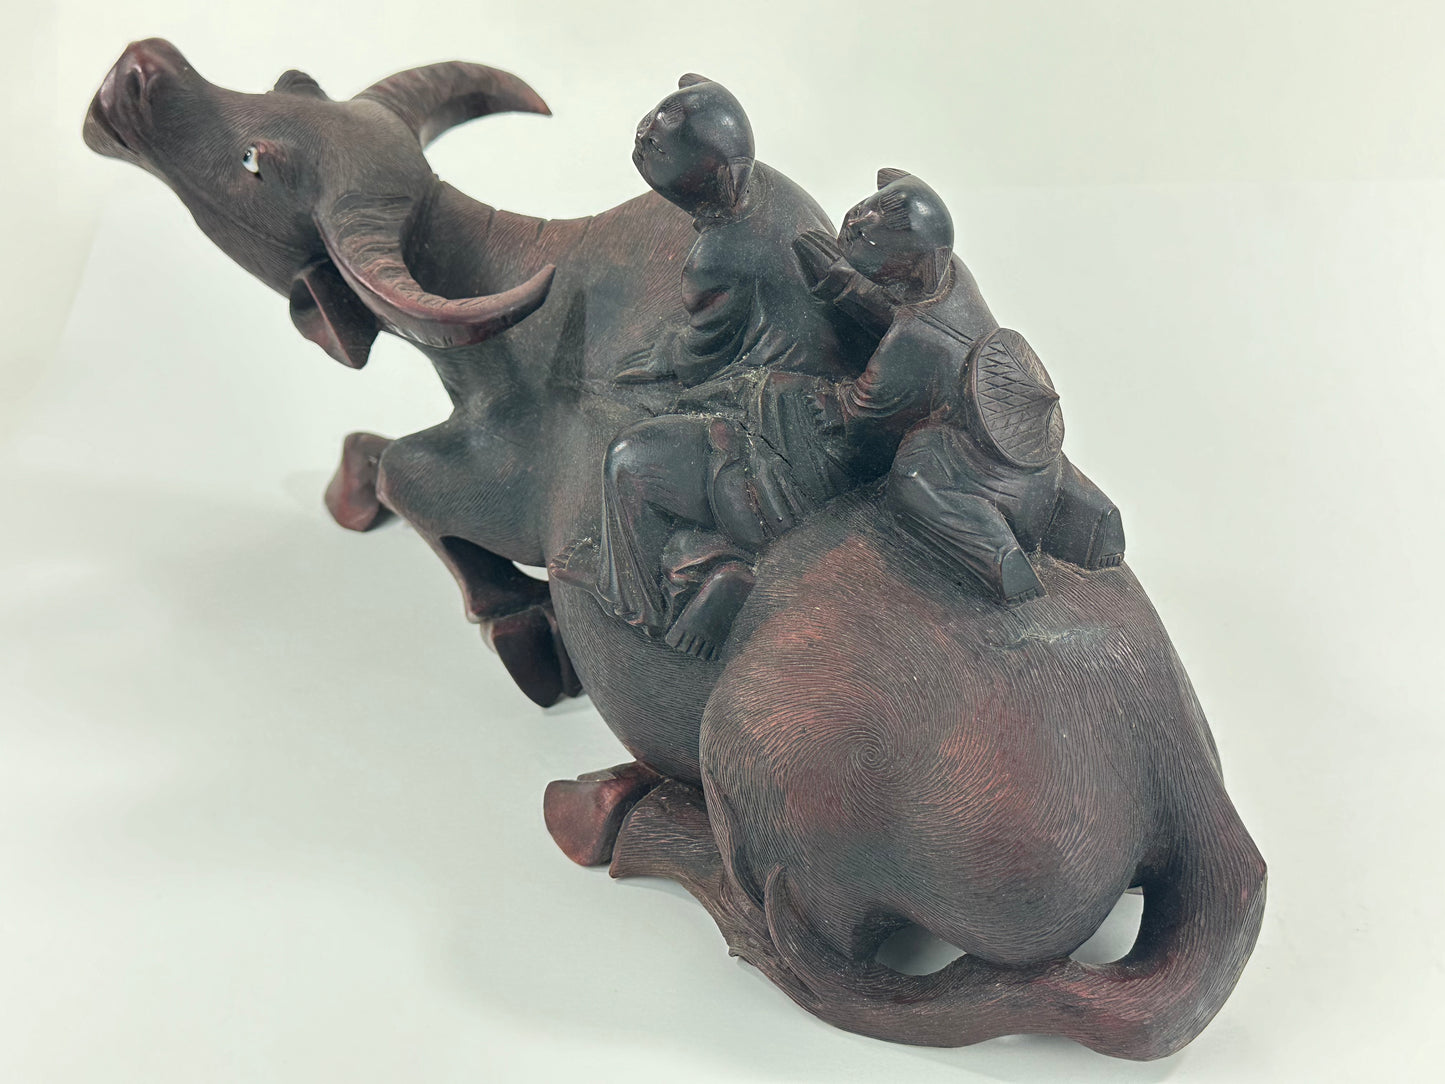 Antique Chinese Hand Carved Wooden Sculpture Buffalo & Children 14”